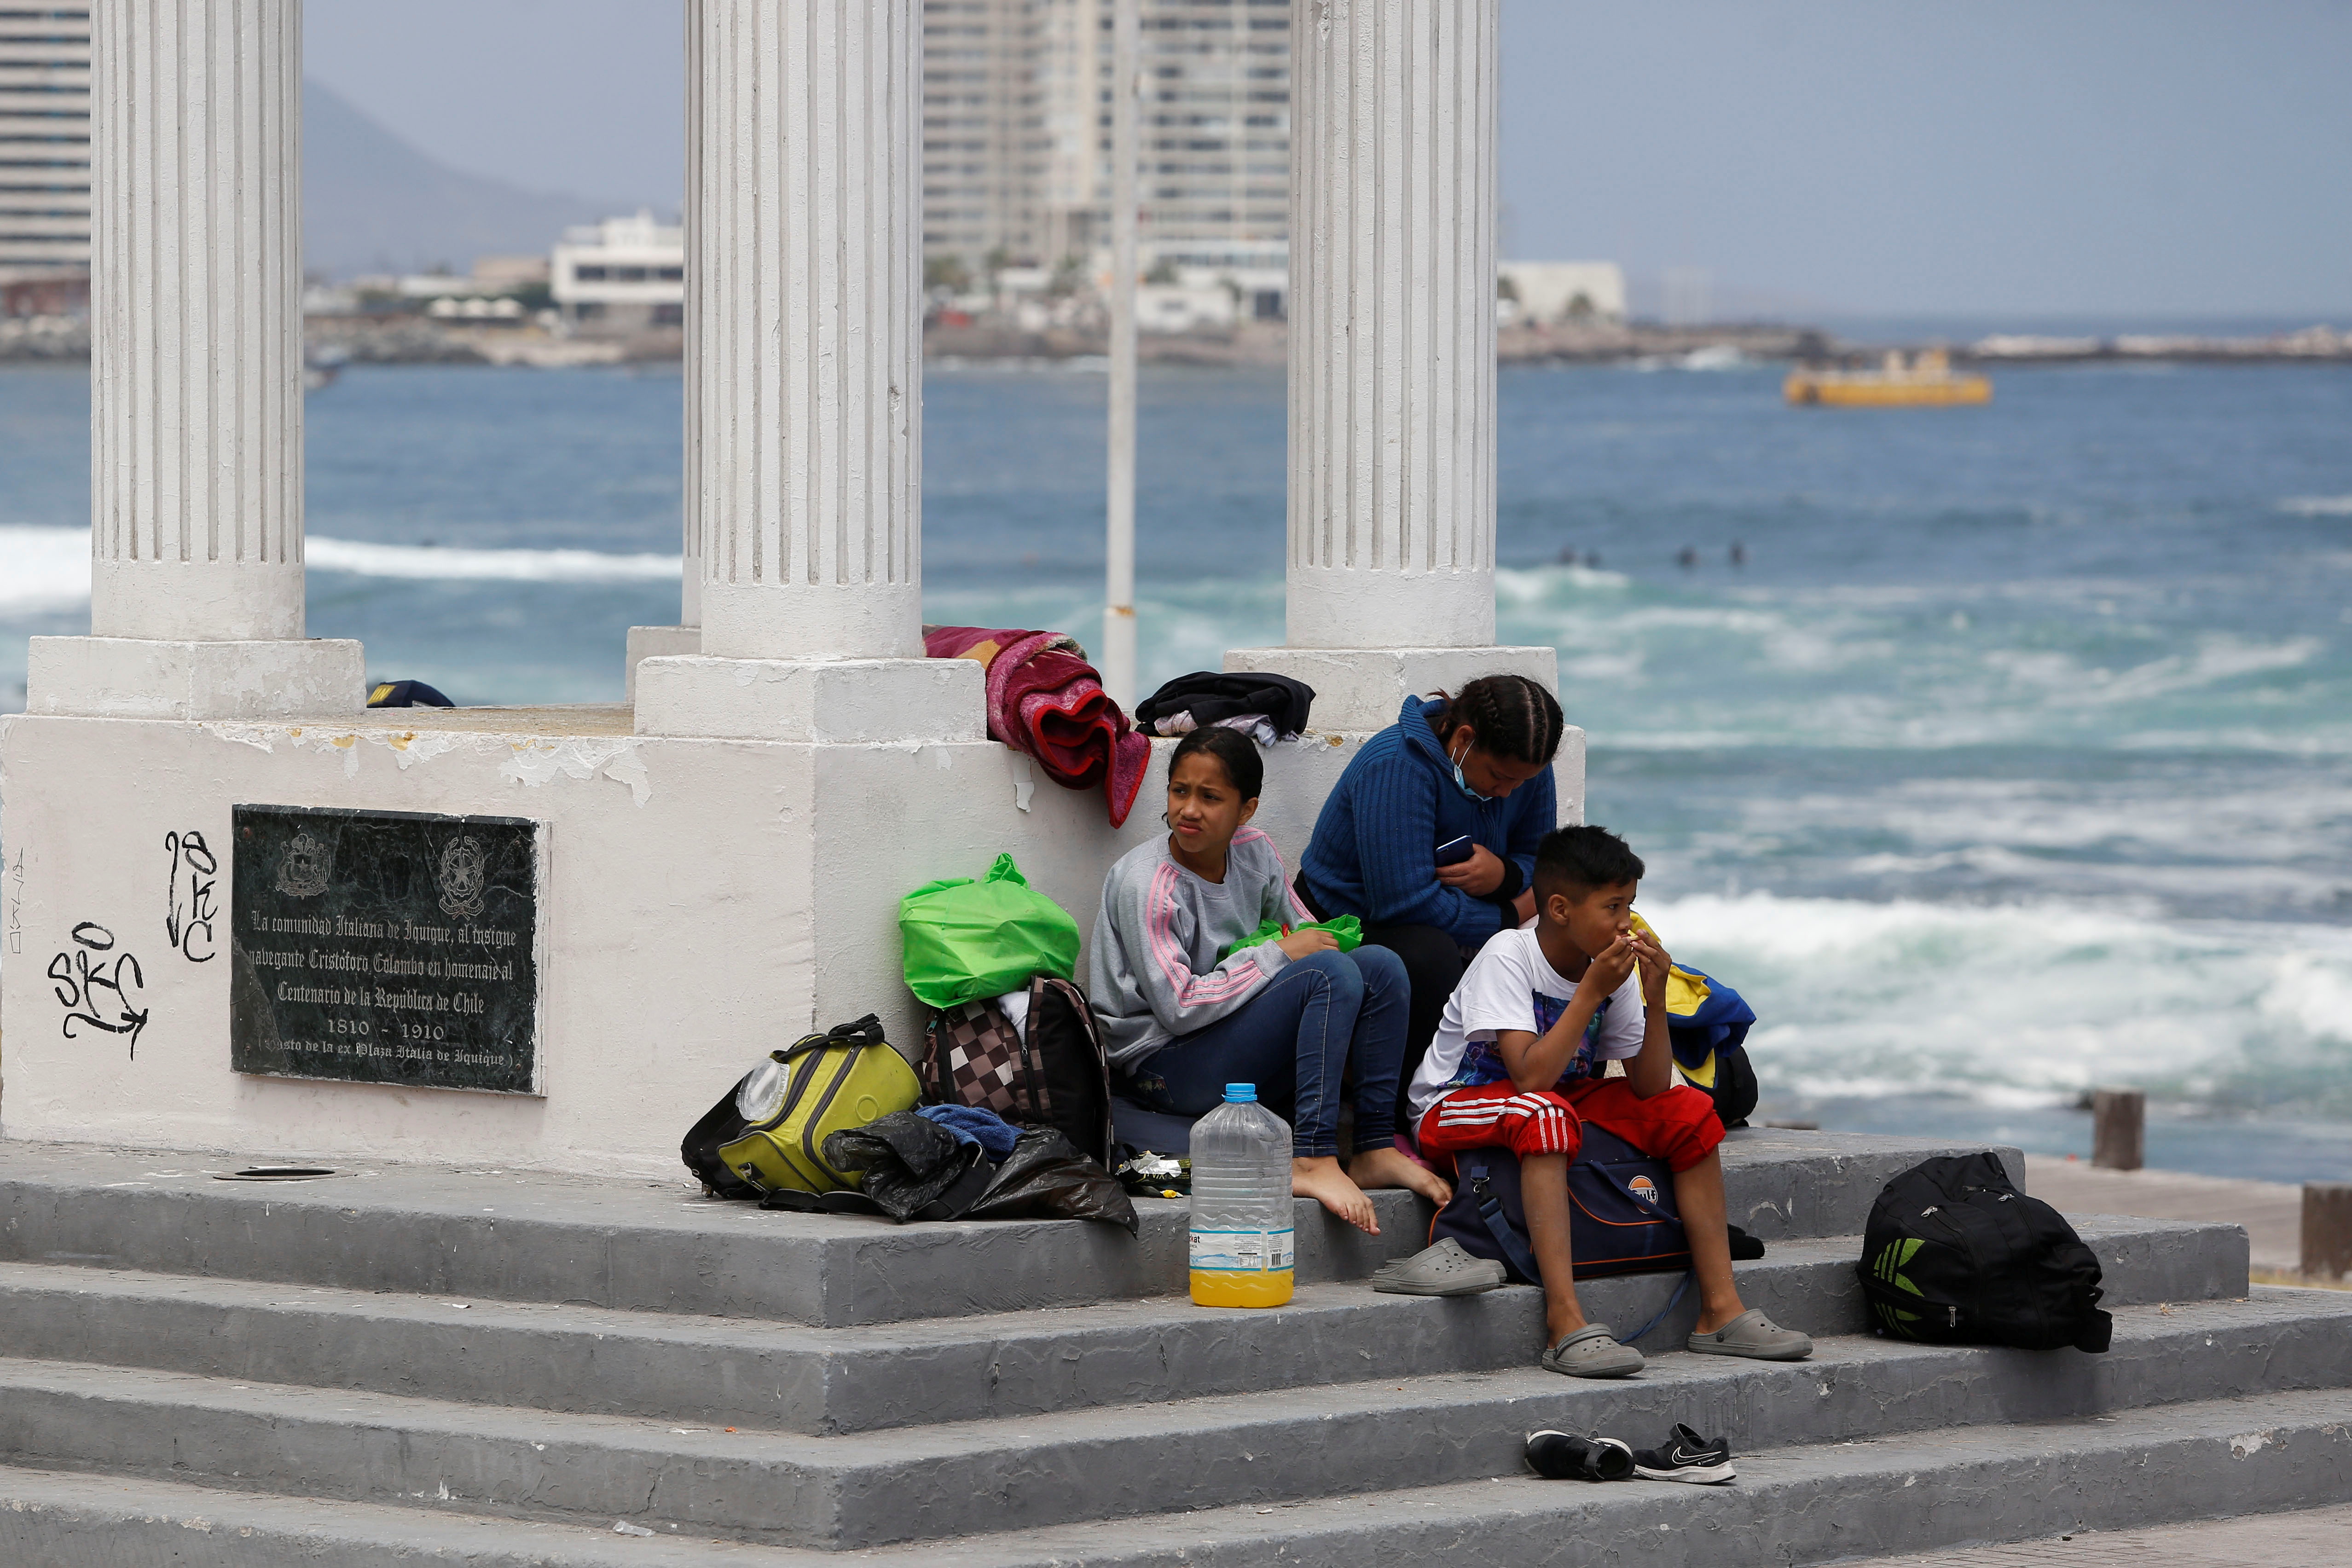 Venezuelan migrants camp next to the ocean after anti-immigration rally in Iquique